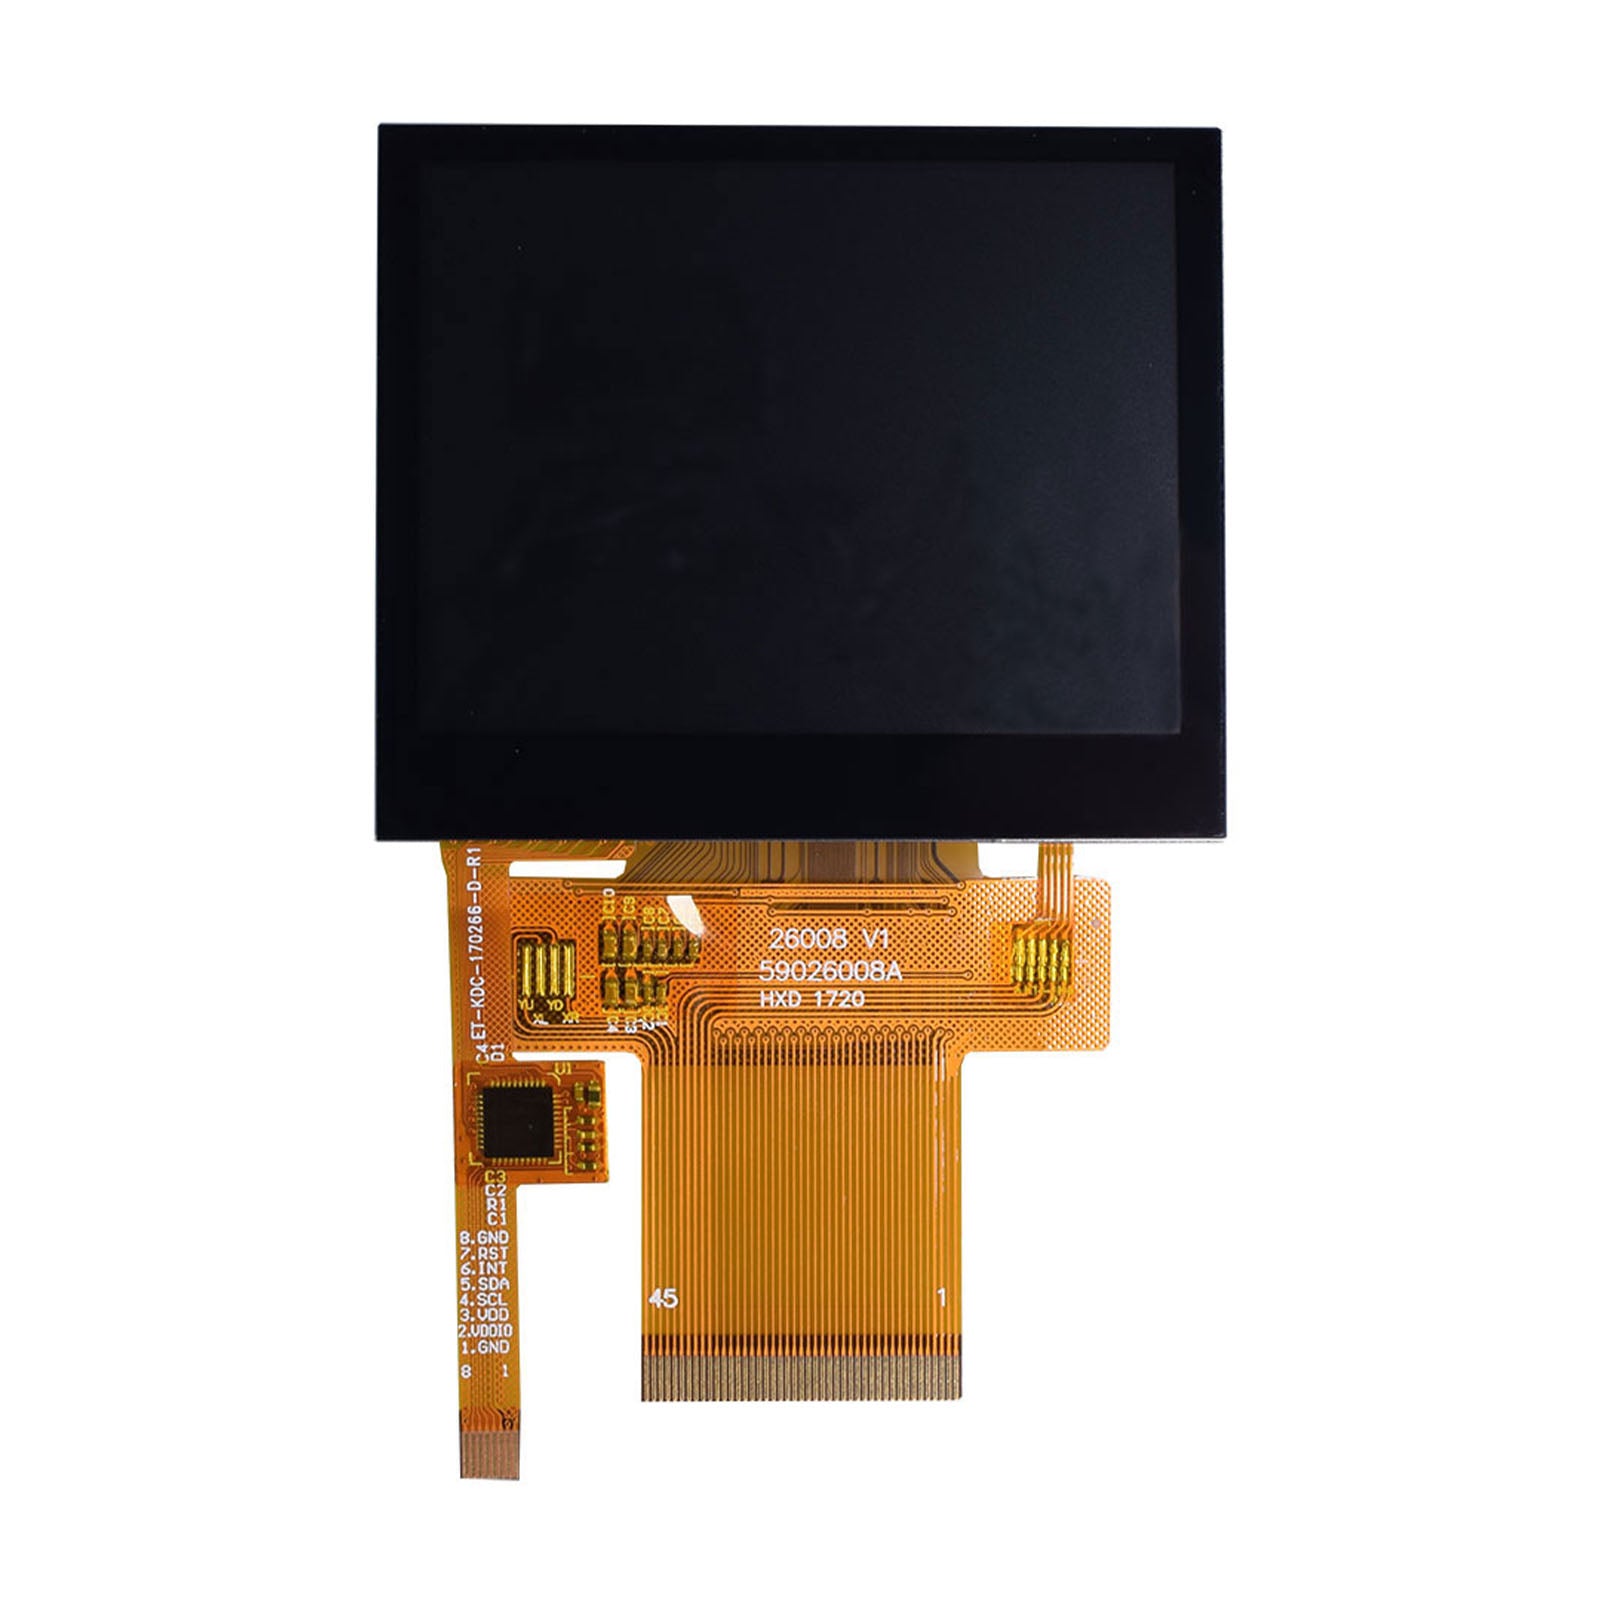 2.6 inch TFT Display Panel with 320x240 resolution and capacitive touch capability, utilizing SPI, MCU, and RGB interfaces